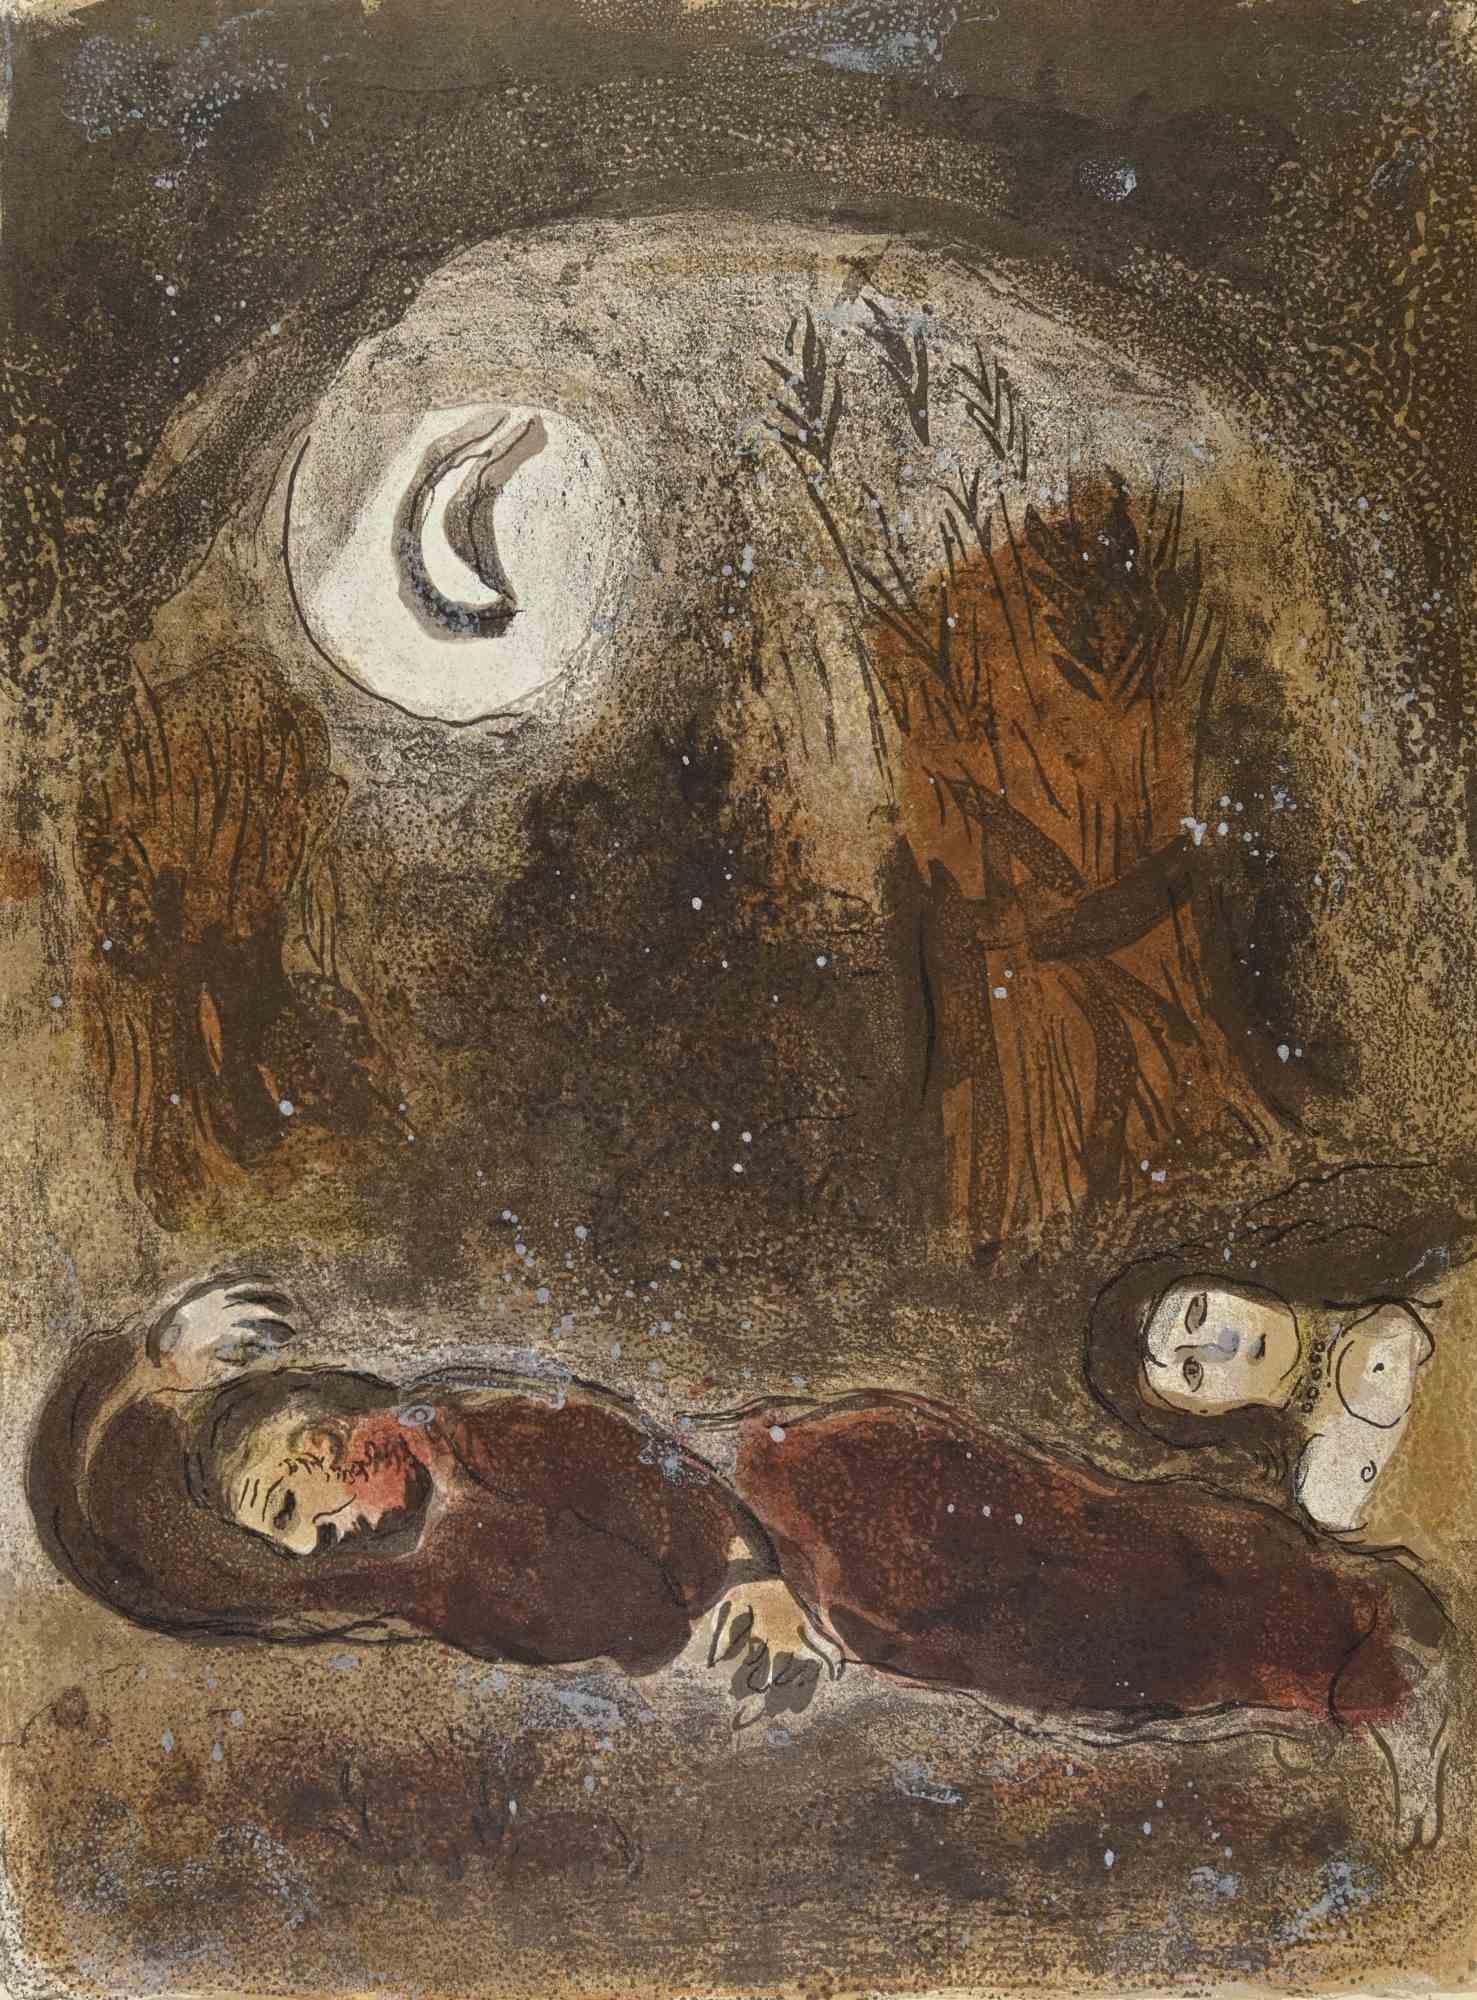 Ruth at the feet of Boaz  is an artwork from the Series "The Bible", by Marc Chagall in 1960.
Mixed colored lithograph on brown-toned paper, no signature.
Edition of 6500 unsigned lithographs. Printed by Mourlot and published by Tériade, Paris.
Ref.